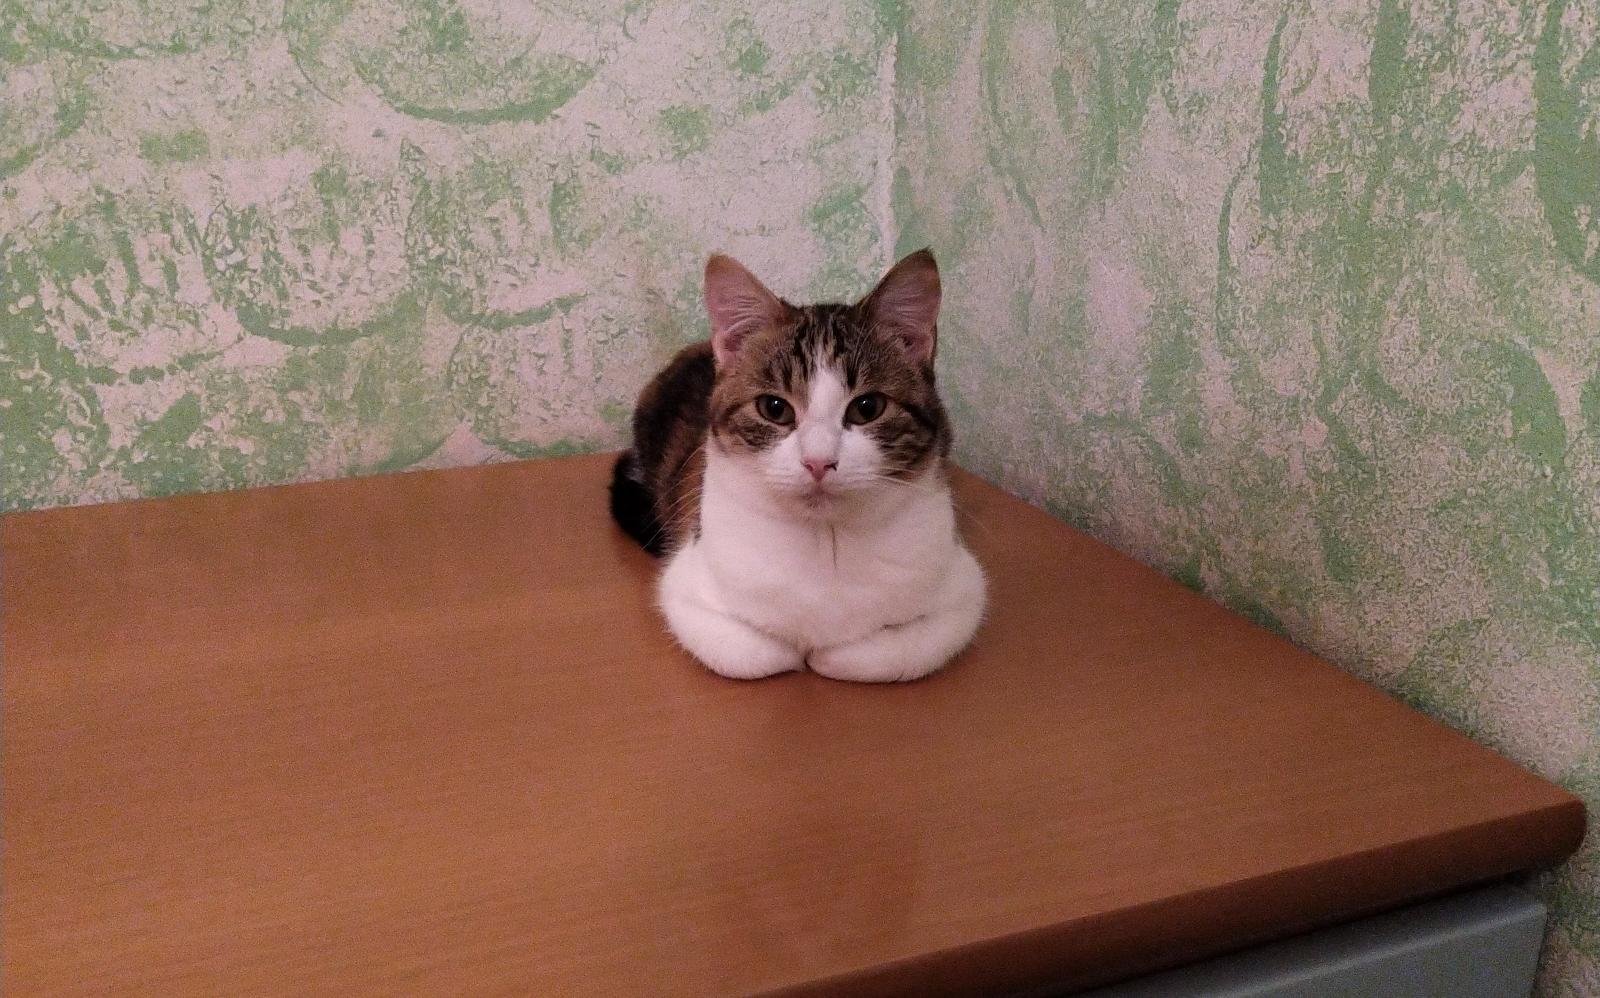 Amicia on a desk looking judgmental